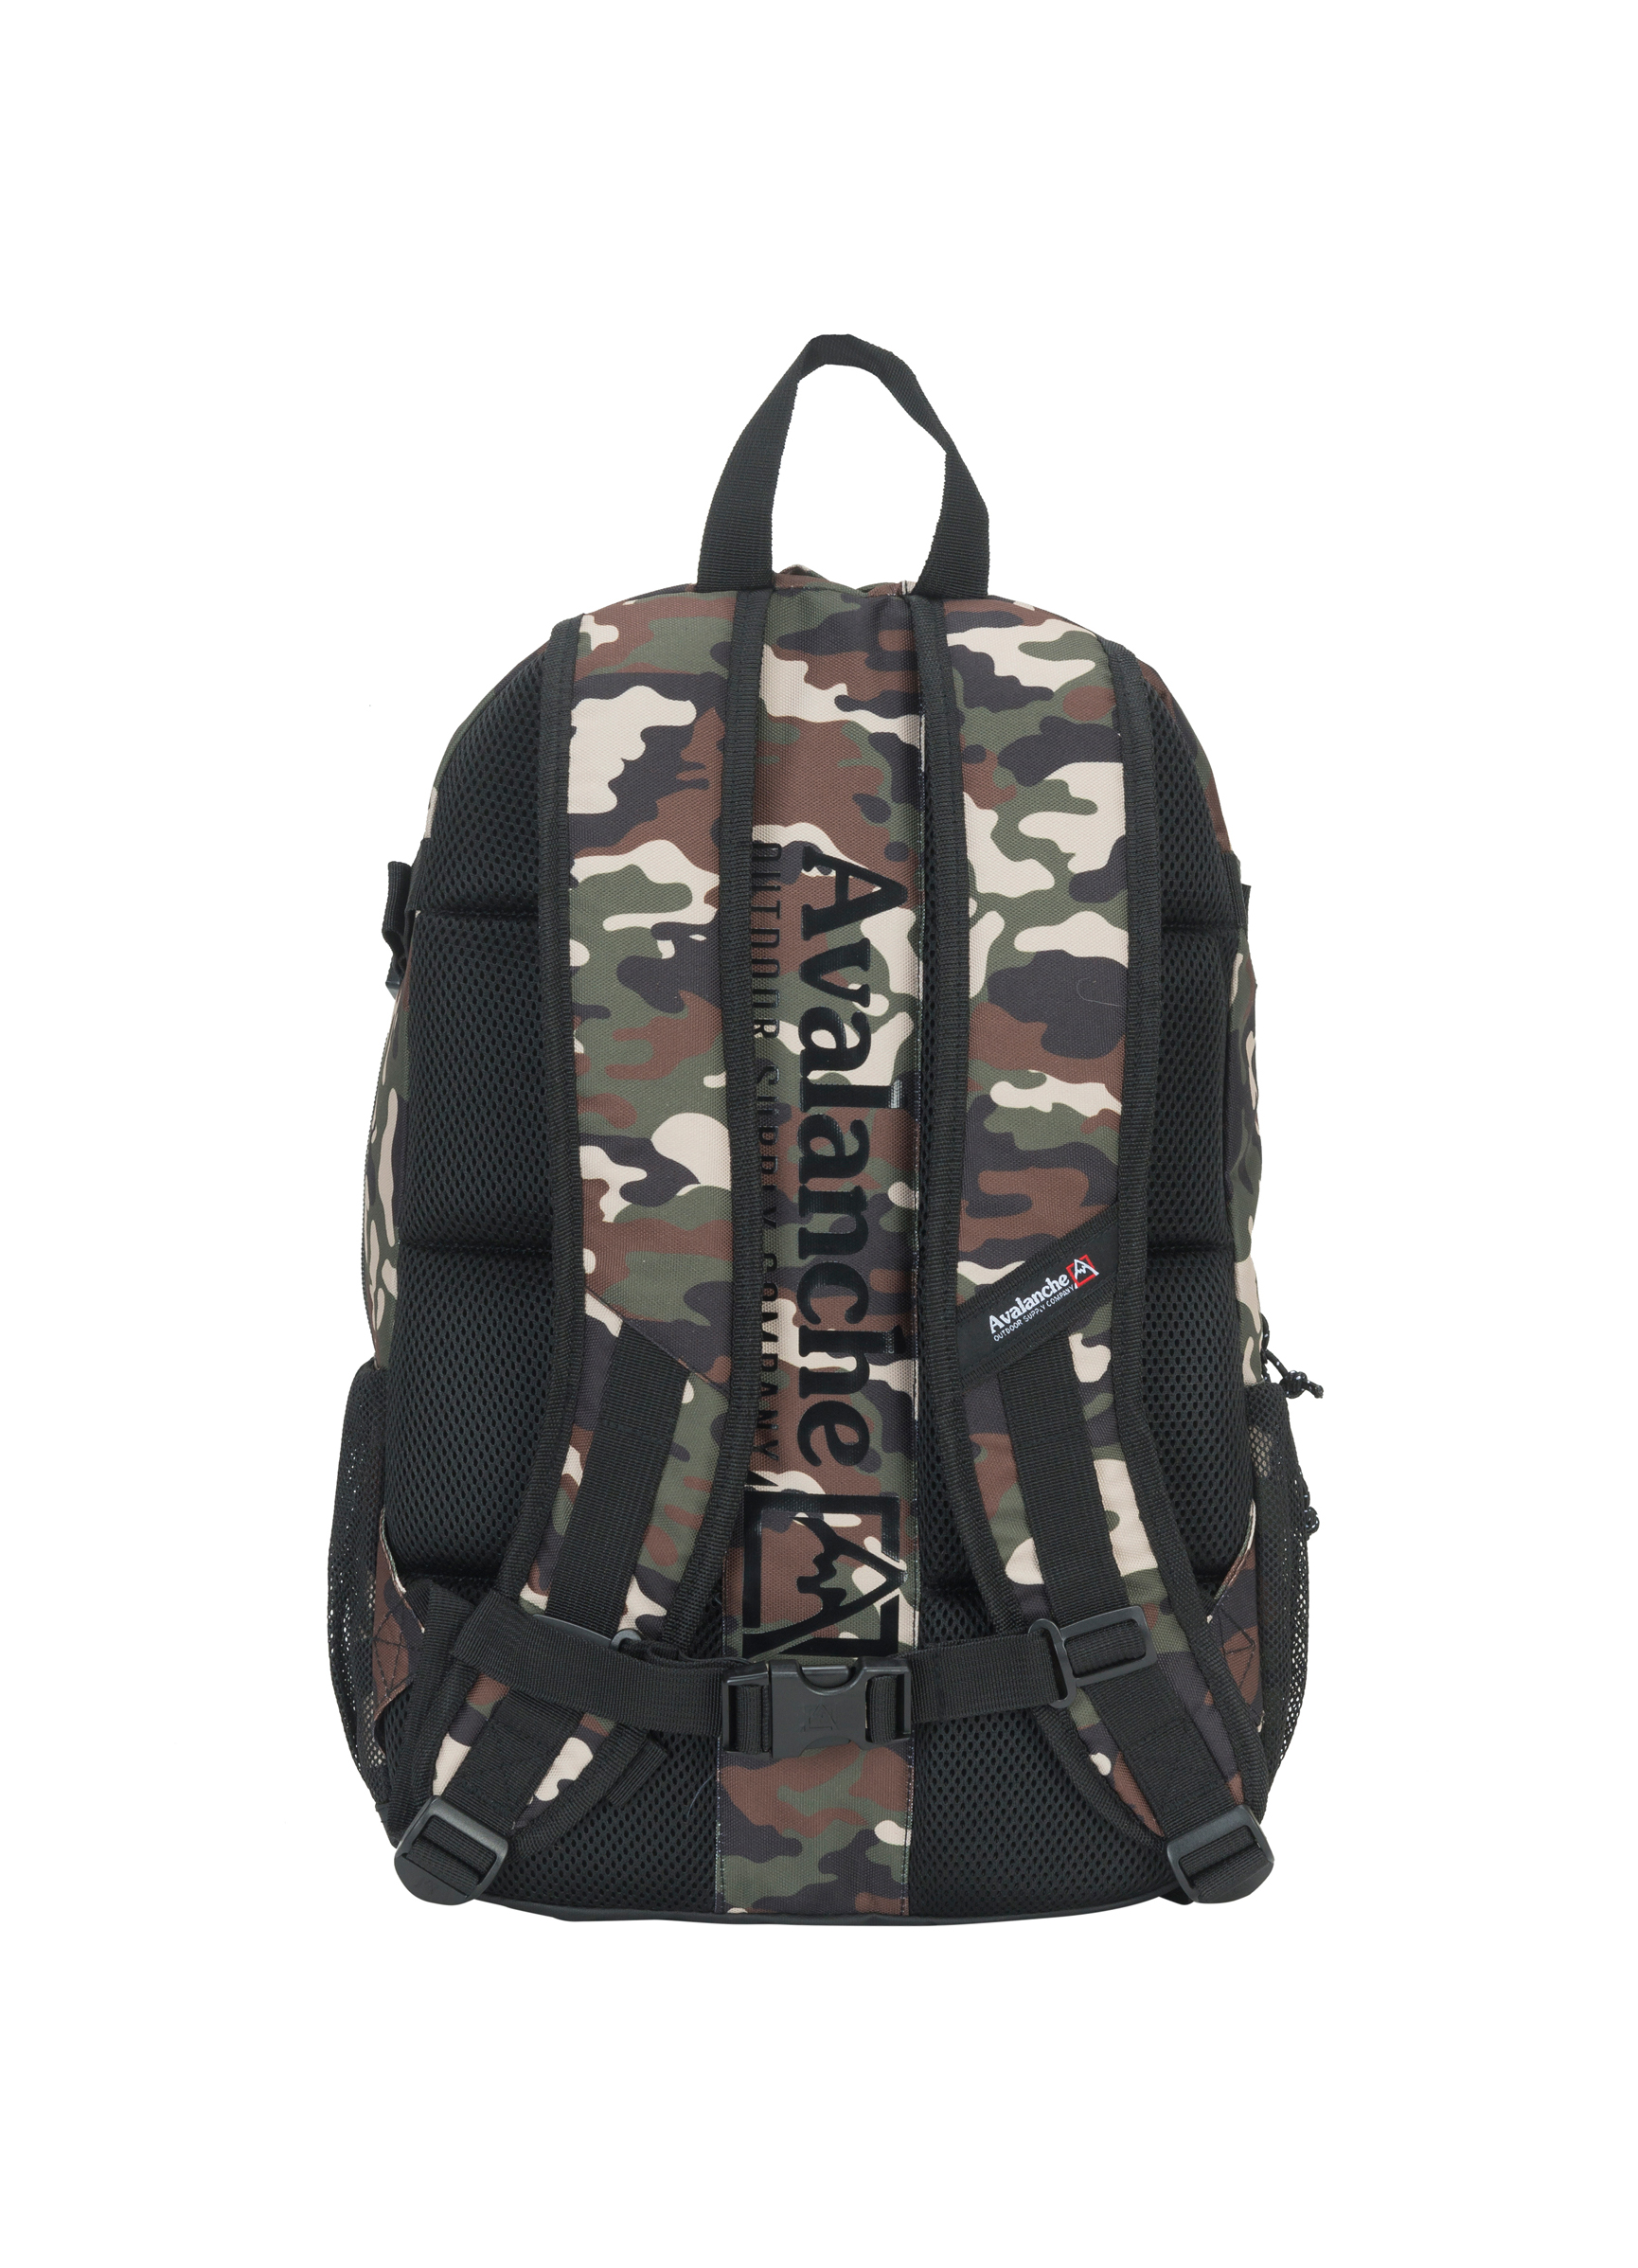 Avalanche Outdoors Camo 22 Liter Sports Hiking Backpack With Water Bottle Pockets - image 3 of 4